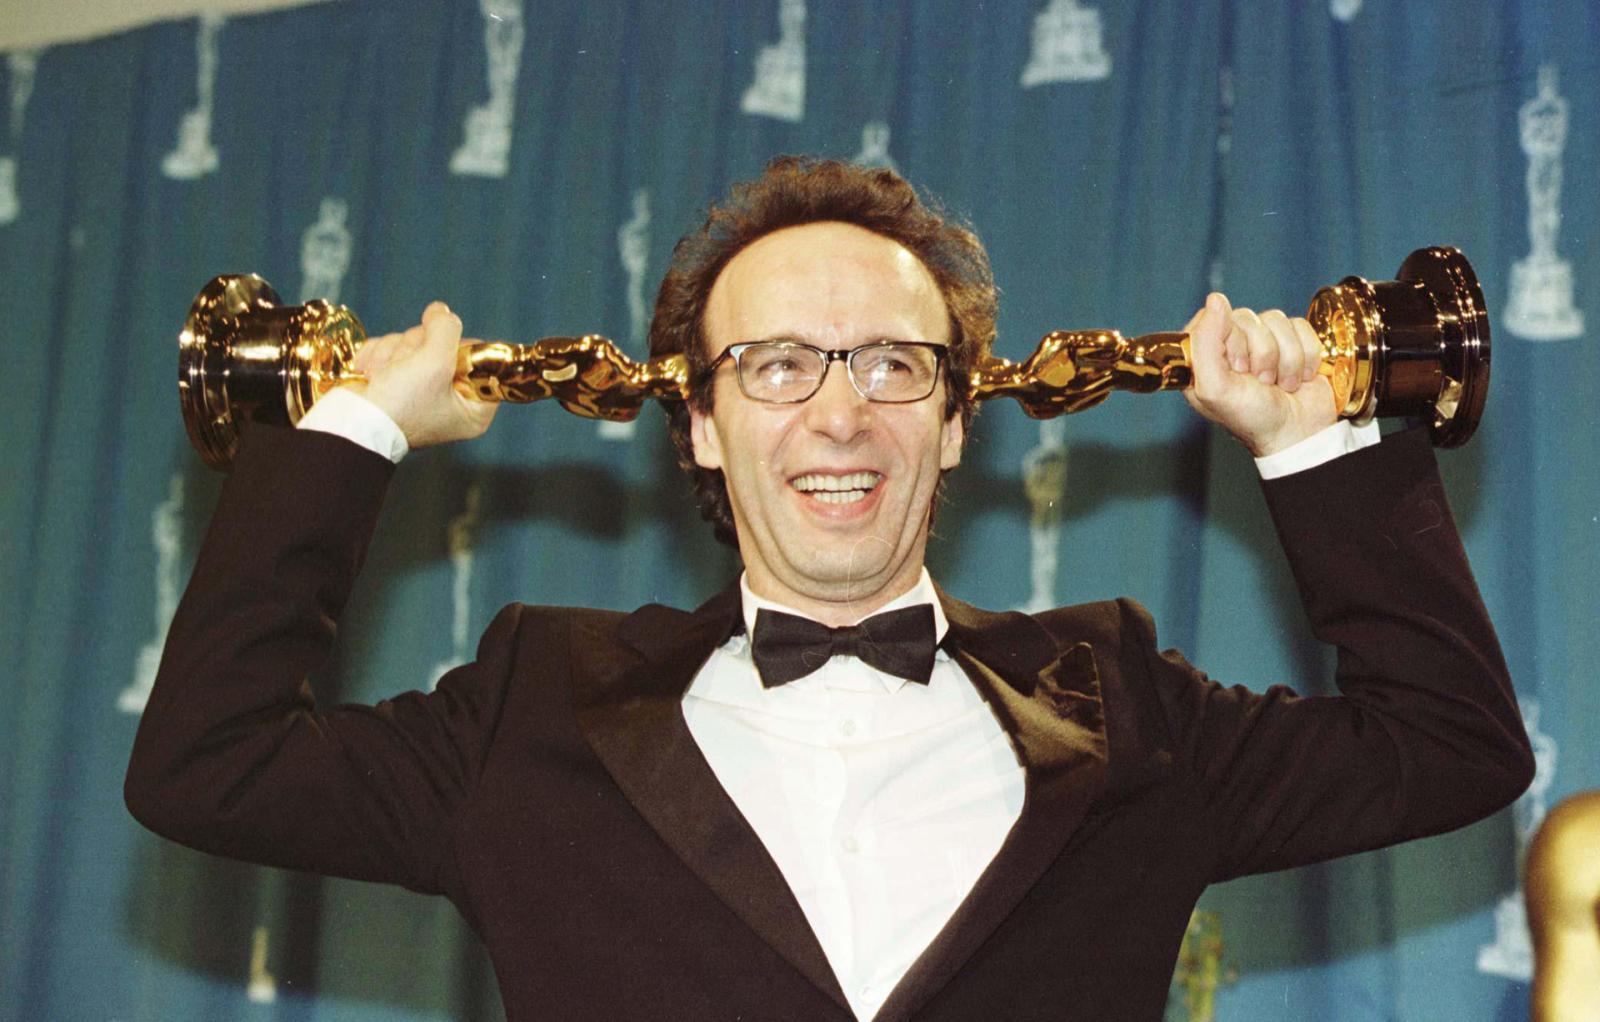 The Oscars Curse: 8 Actors Whose Career Went Down the Drain After Winning - image 8